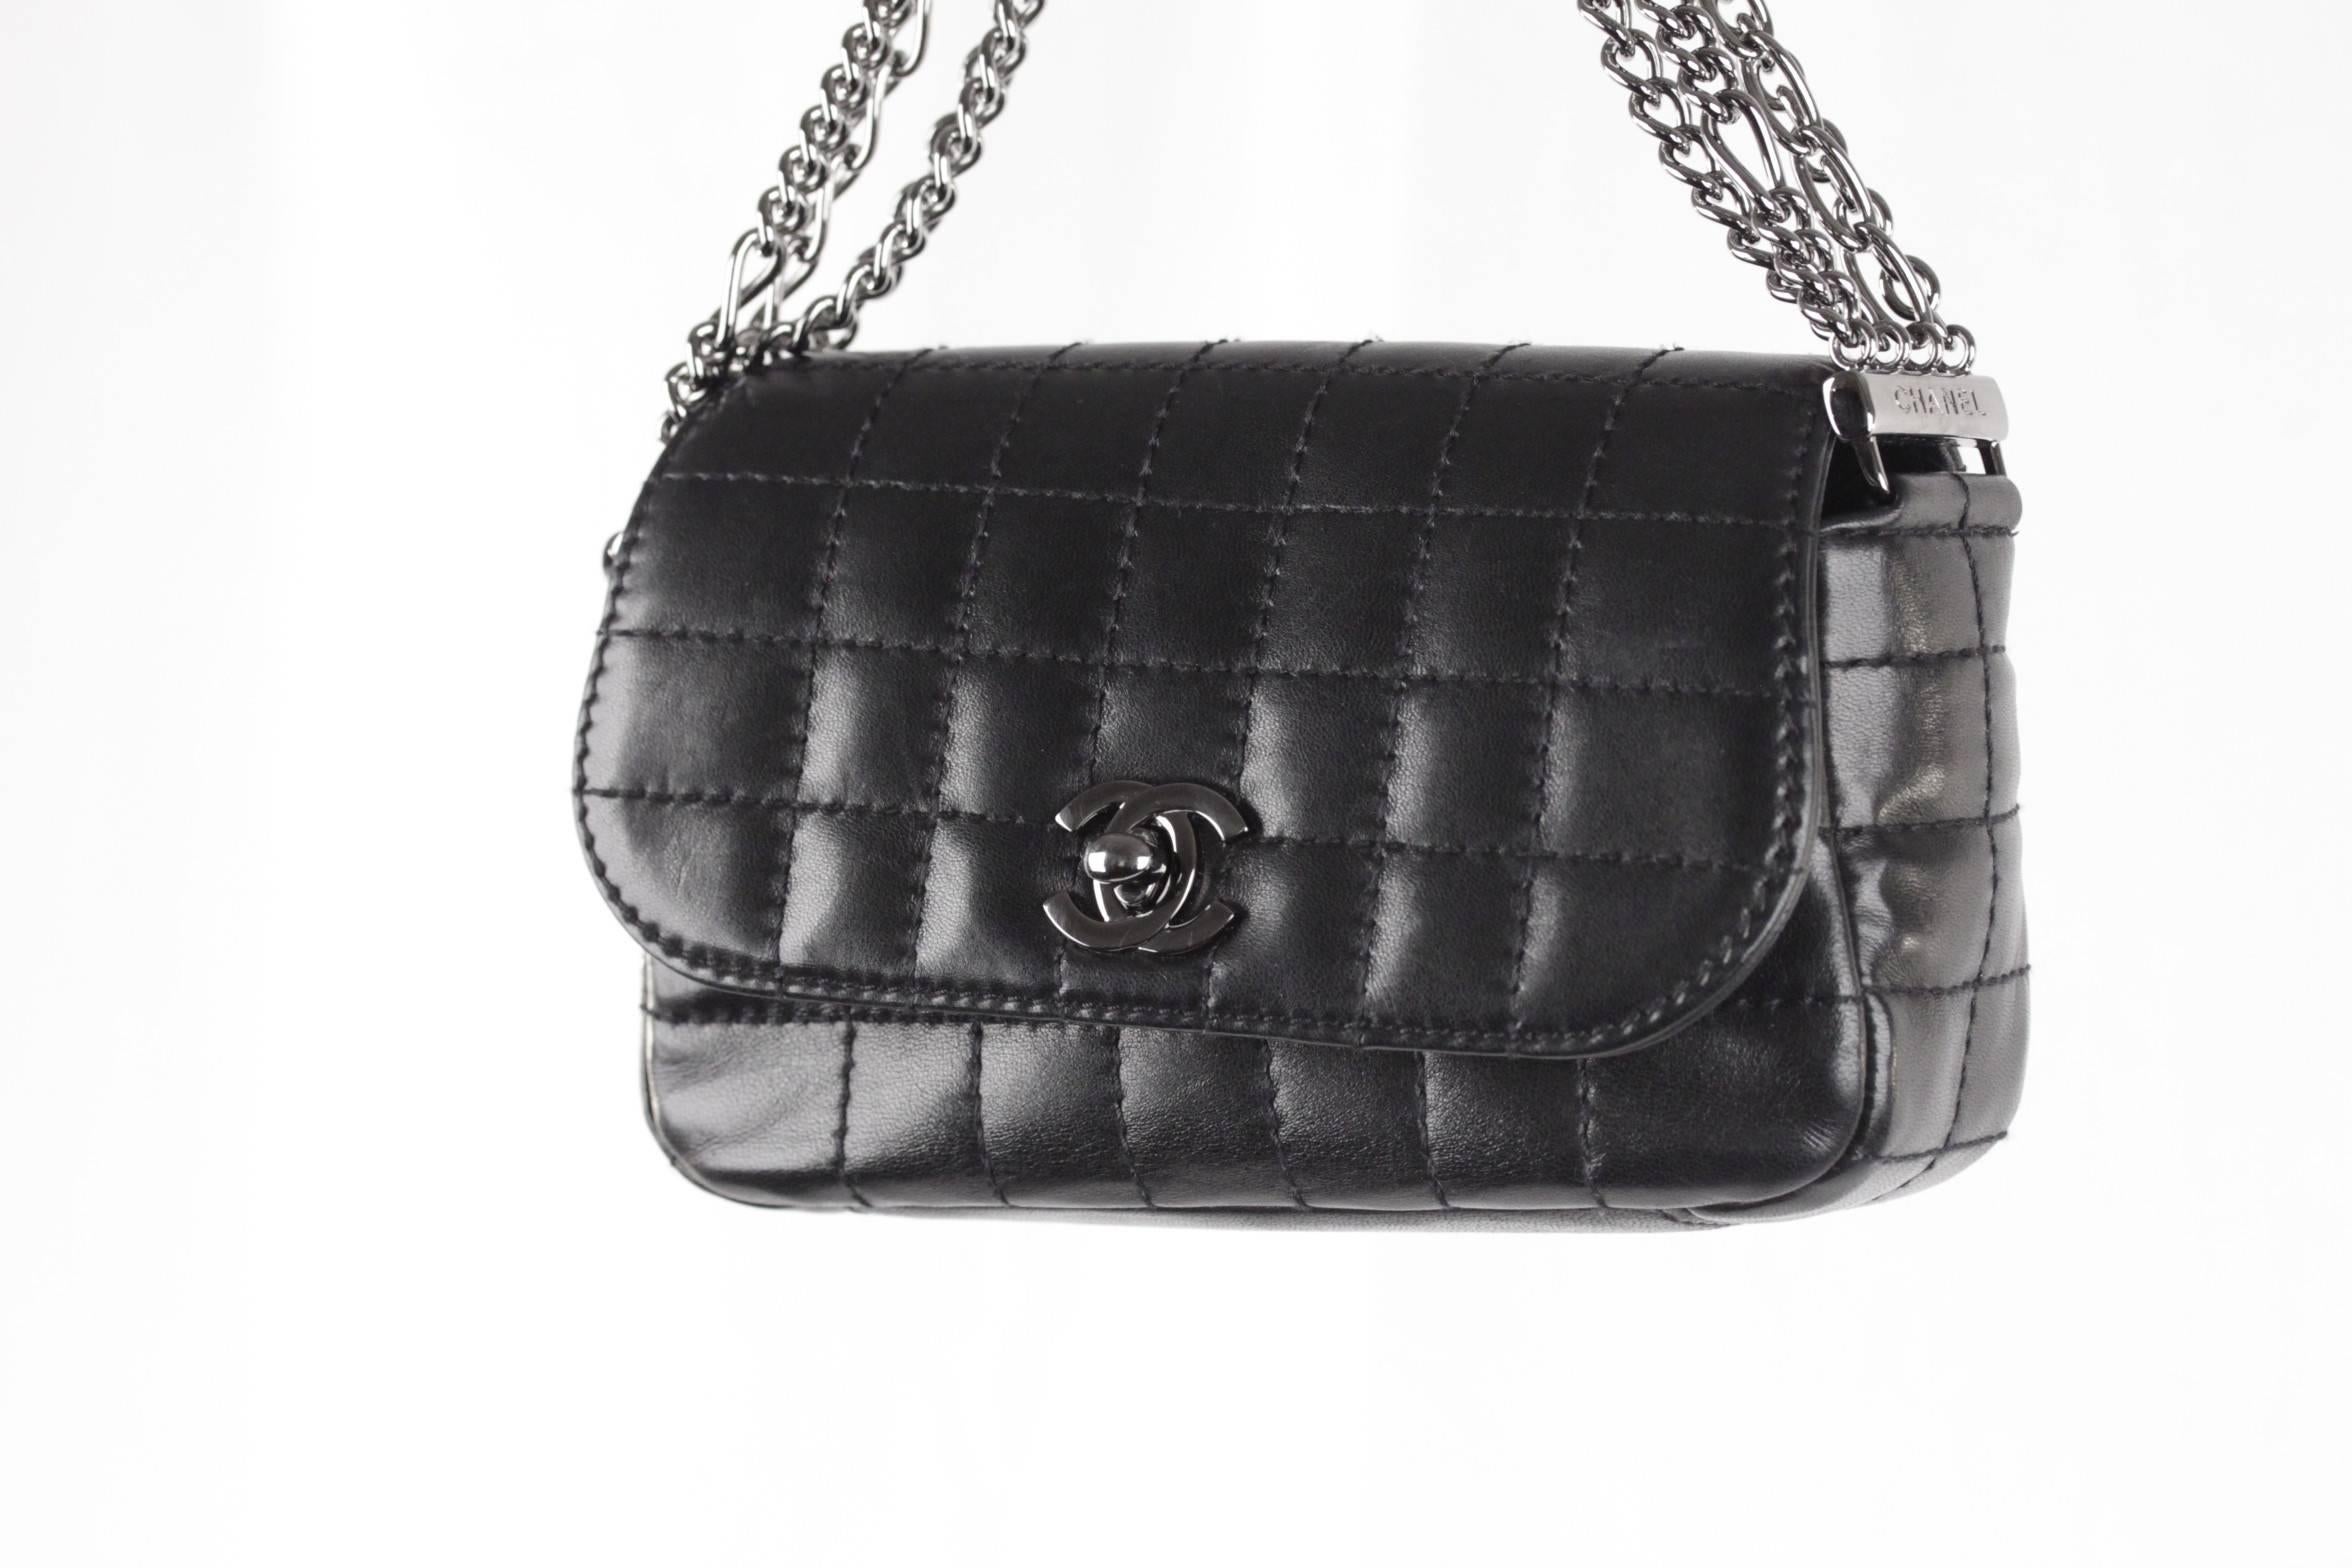  - Chanel Black Square Quilted Leather Chain Flap Bag
- Multi-chain handle
- Gunmetal CC - CHANEL logo twist closure
- Chanel signature fabric lining
- Measurements: 4 x 7 x 2 inches - 10,2 x 17,7 x 5,1 cm

Logos / Tags: 'CHANEL -Made in France'